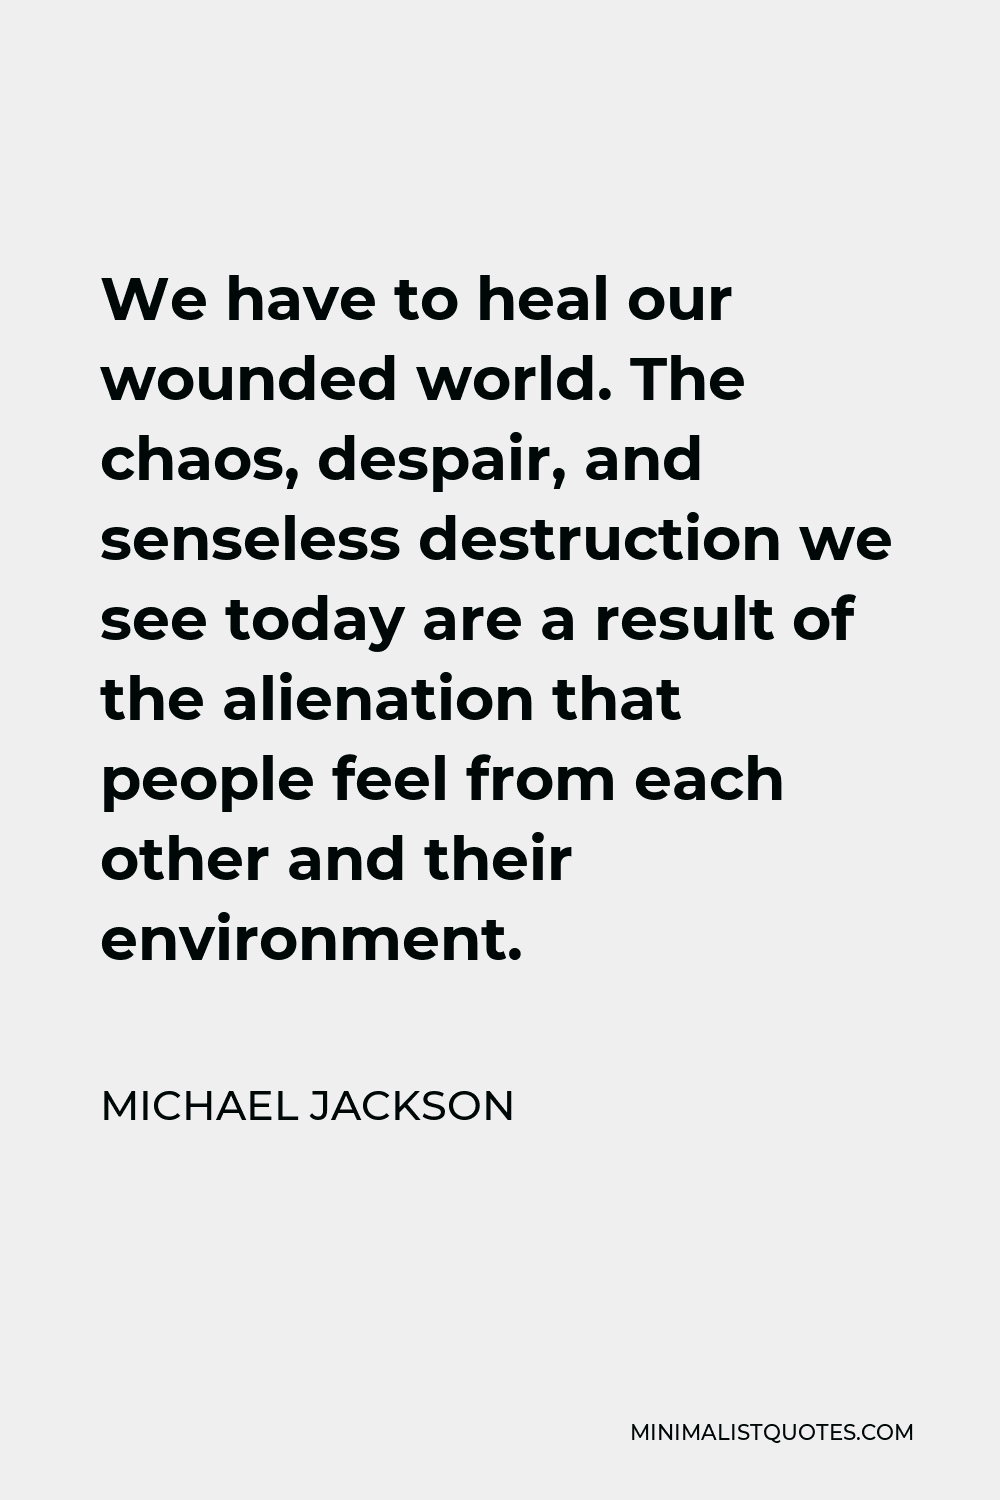 Michael Jackson Quote - We have to heal our wounded world. The chaos, despair, and senseless destruction we see today are a result of the alienation that people feel from each other and their environment.